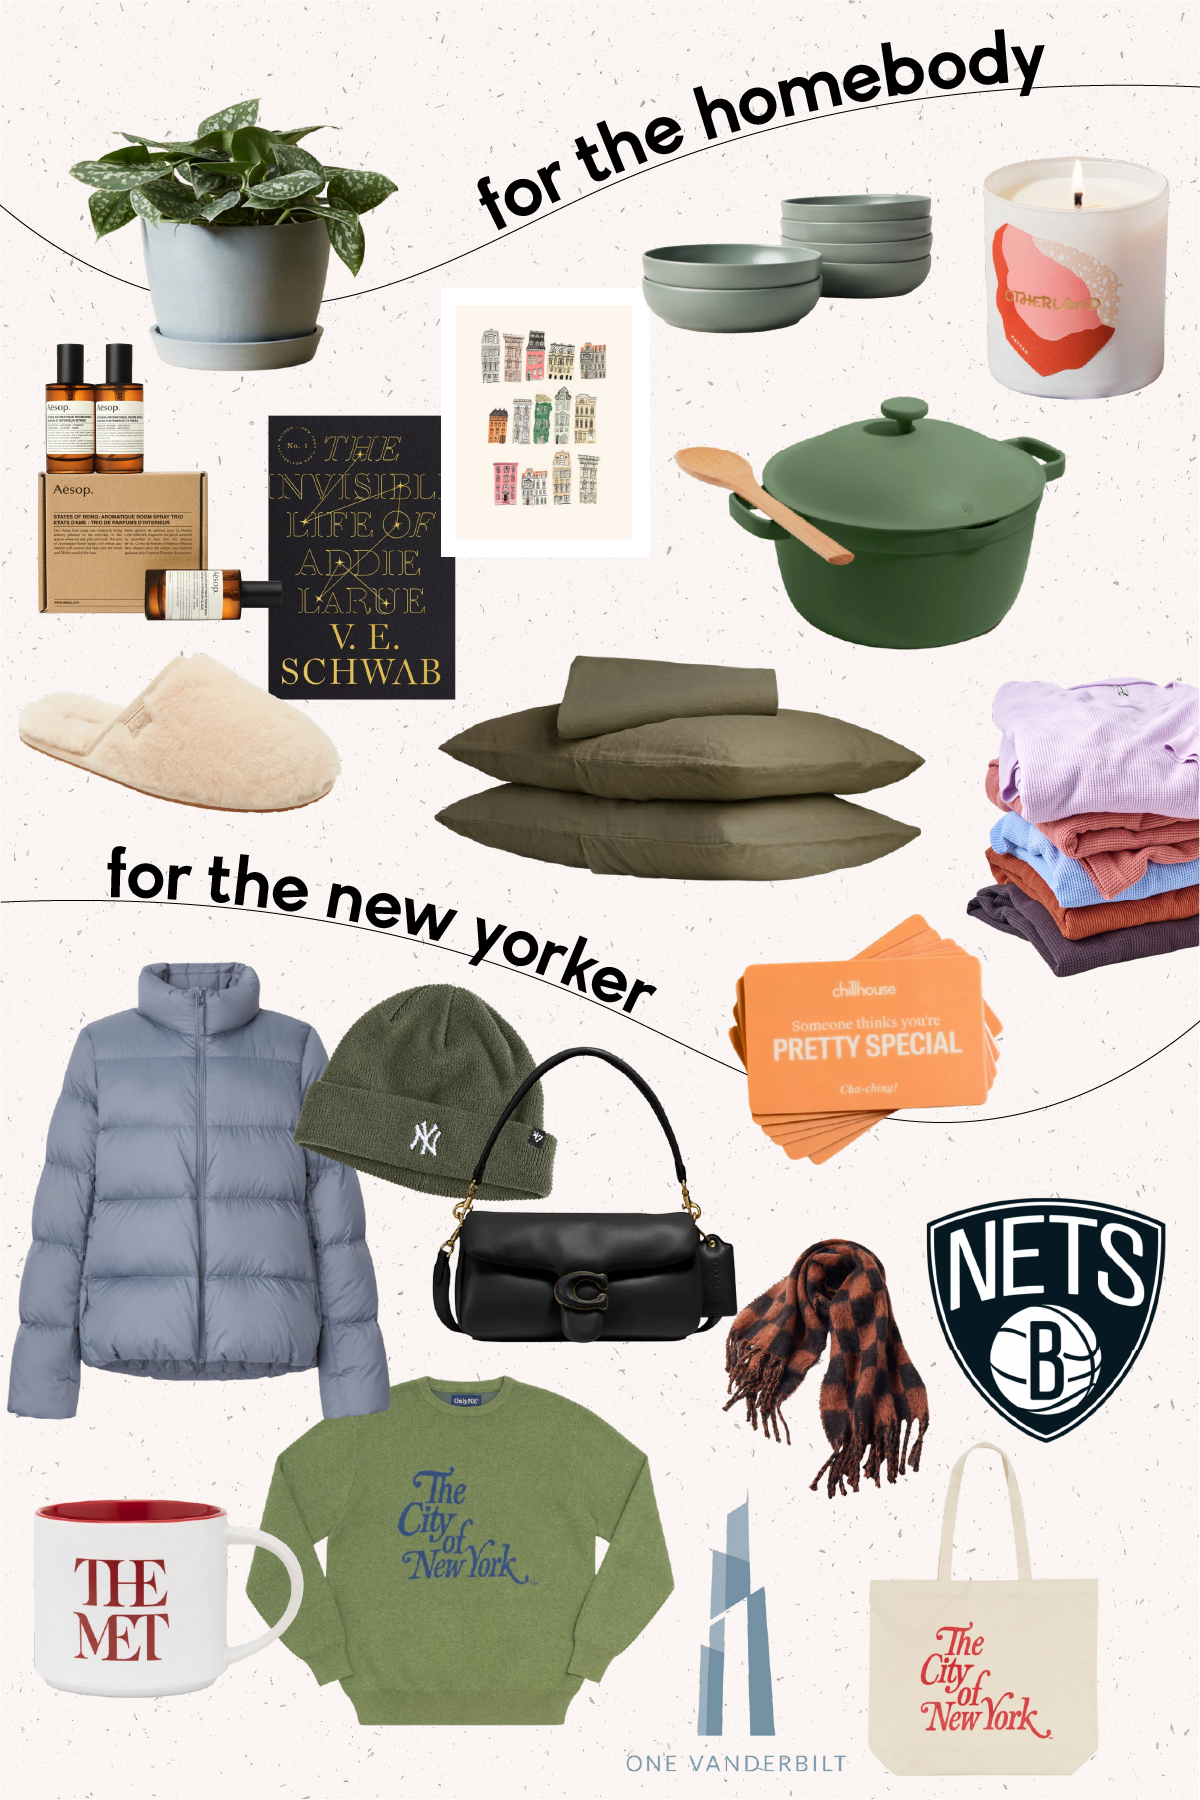 for the new yorker and the homebody | gabby shares favorite products | 2021 gift guides